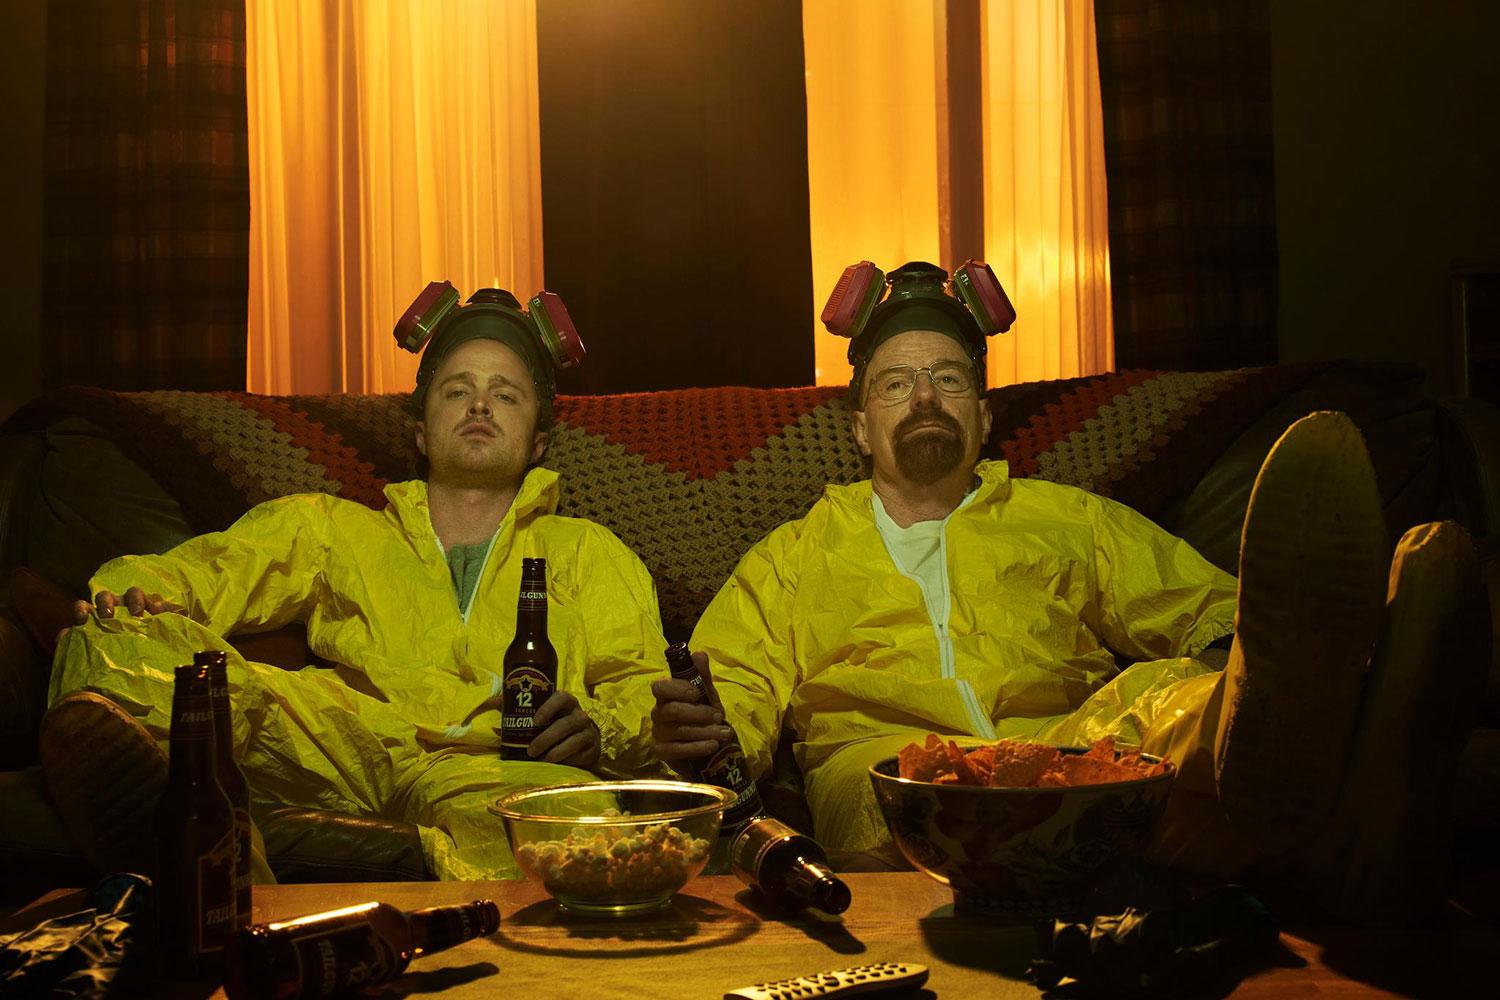 Who's had the most successful post-Breaking Bad career?